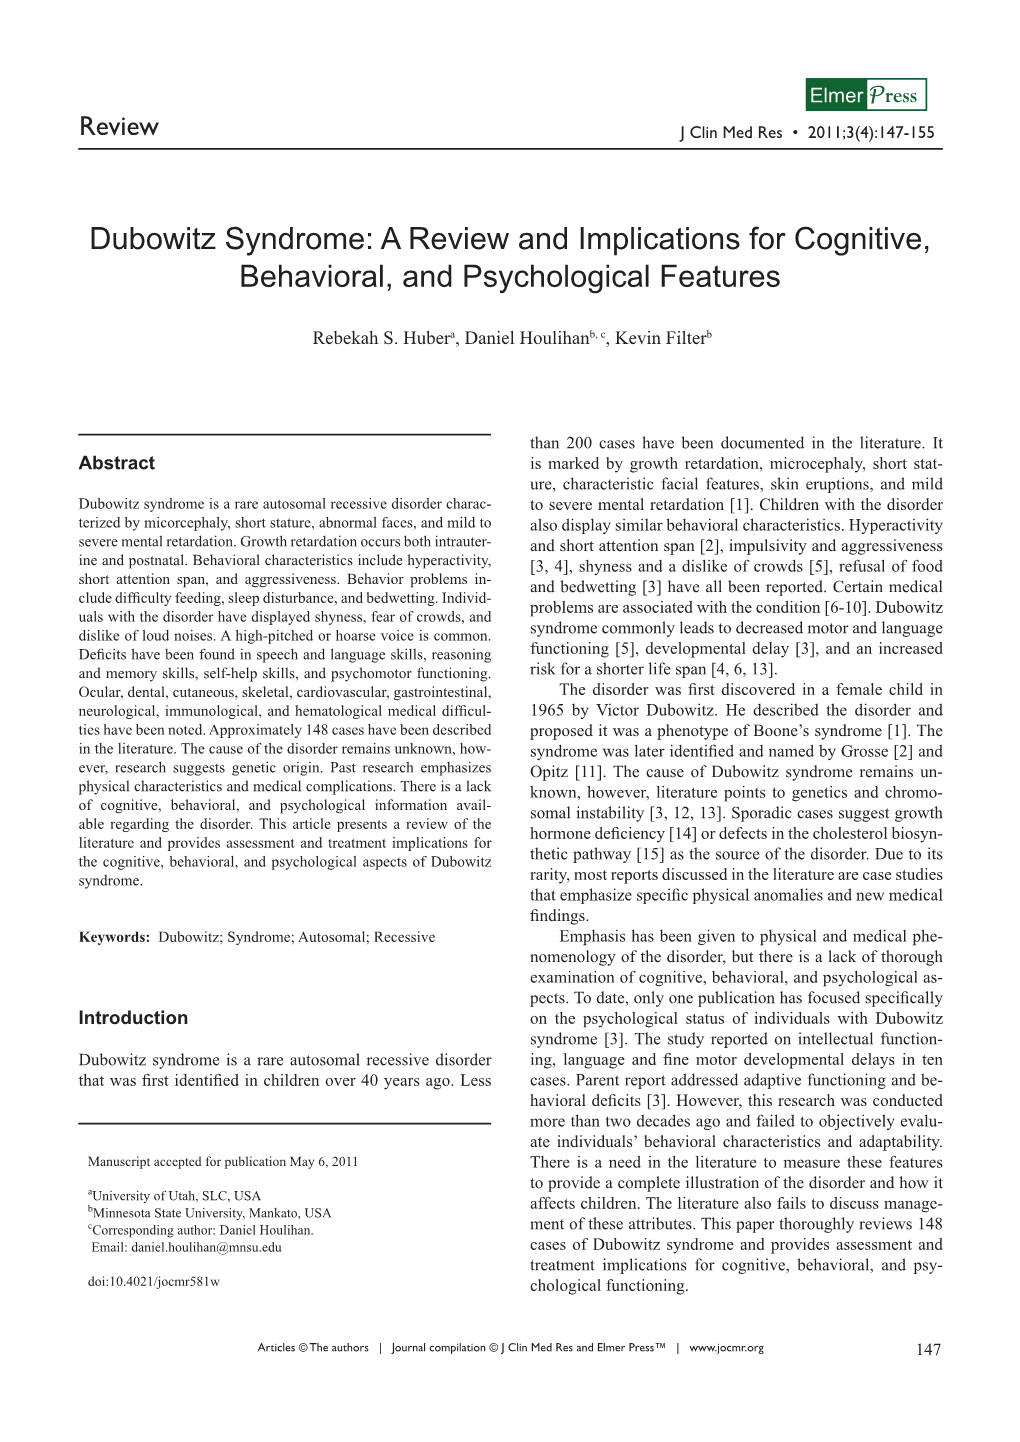 Dubowitz Syndrome: a Review and Implications for Cognitive, Behavioral, and Psychological Features